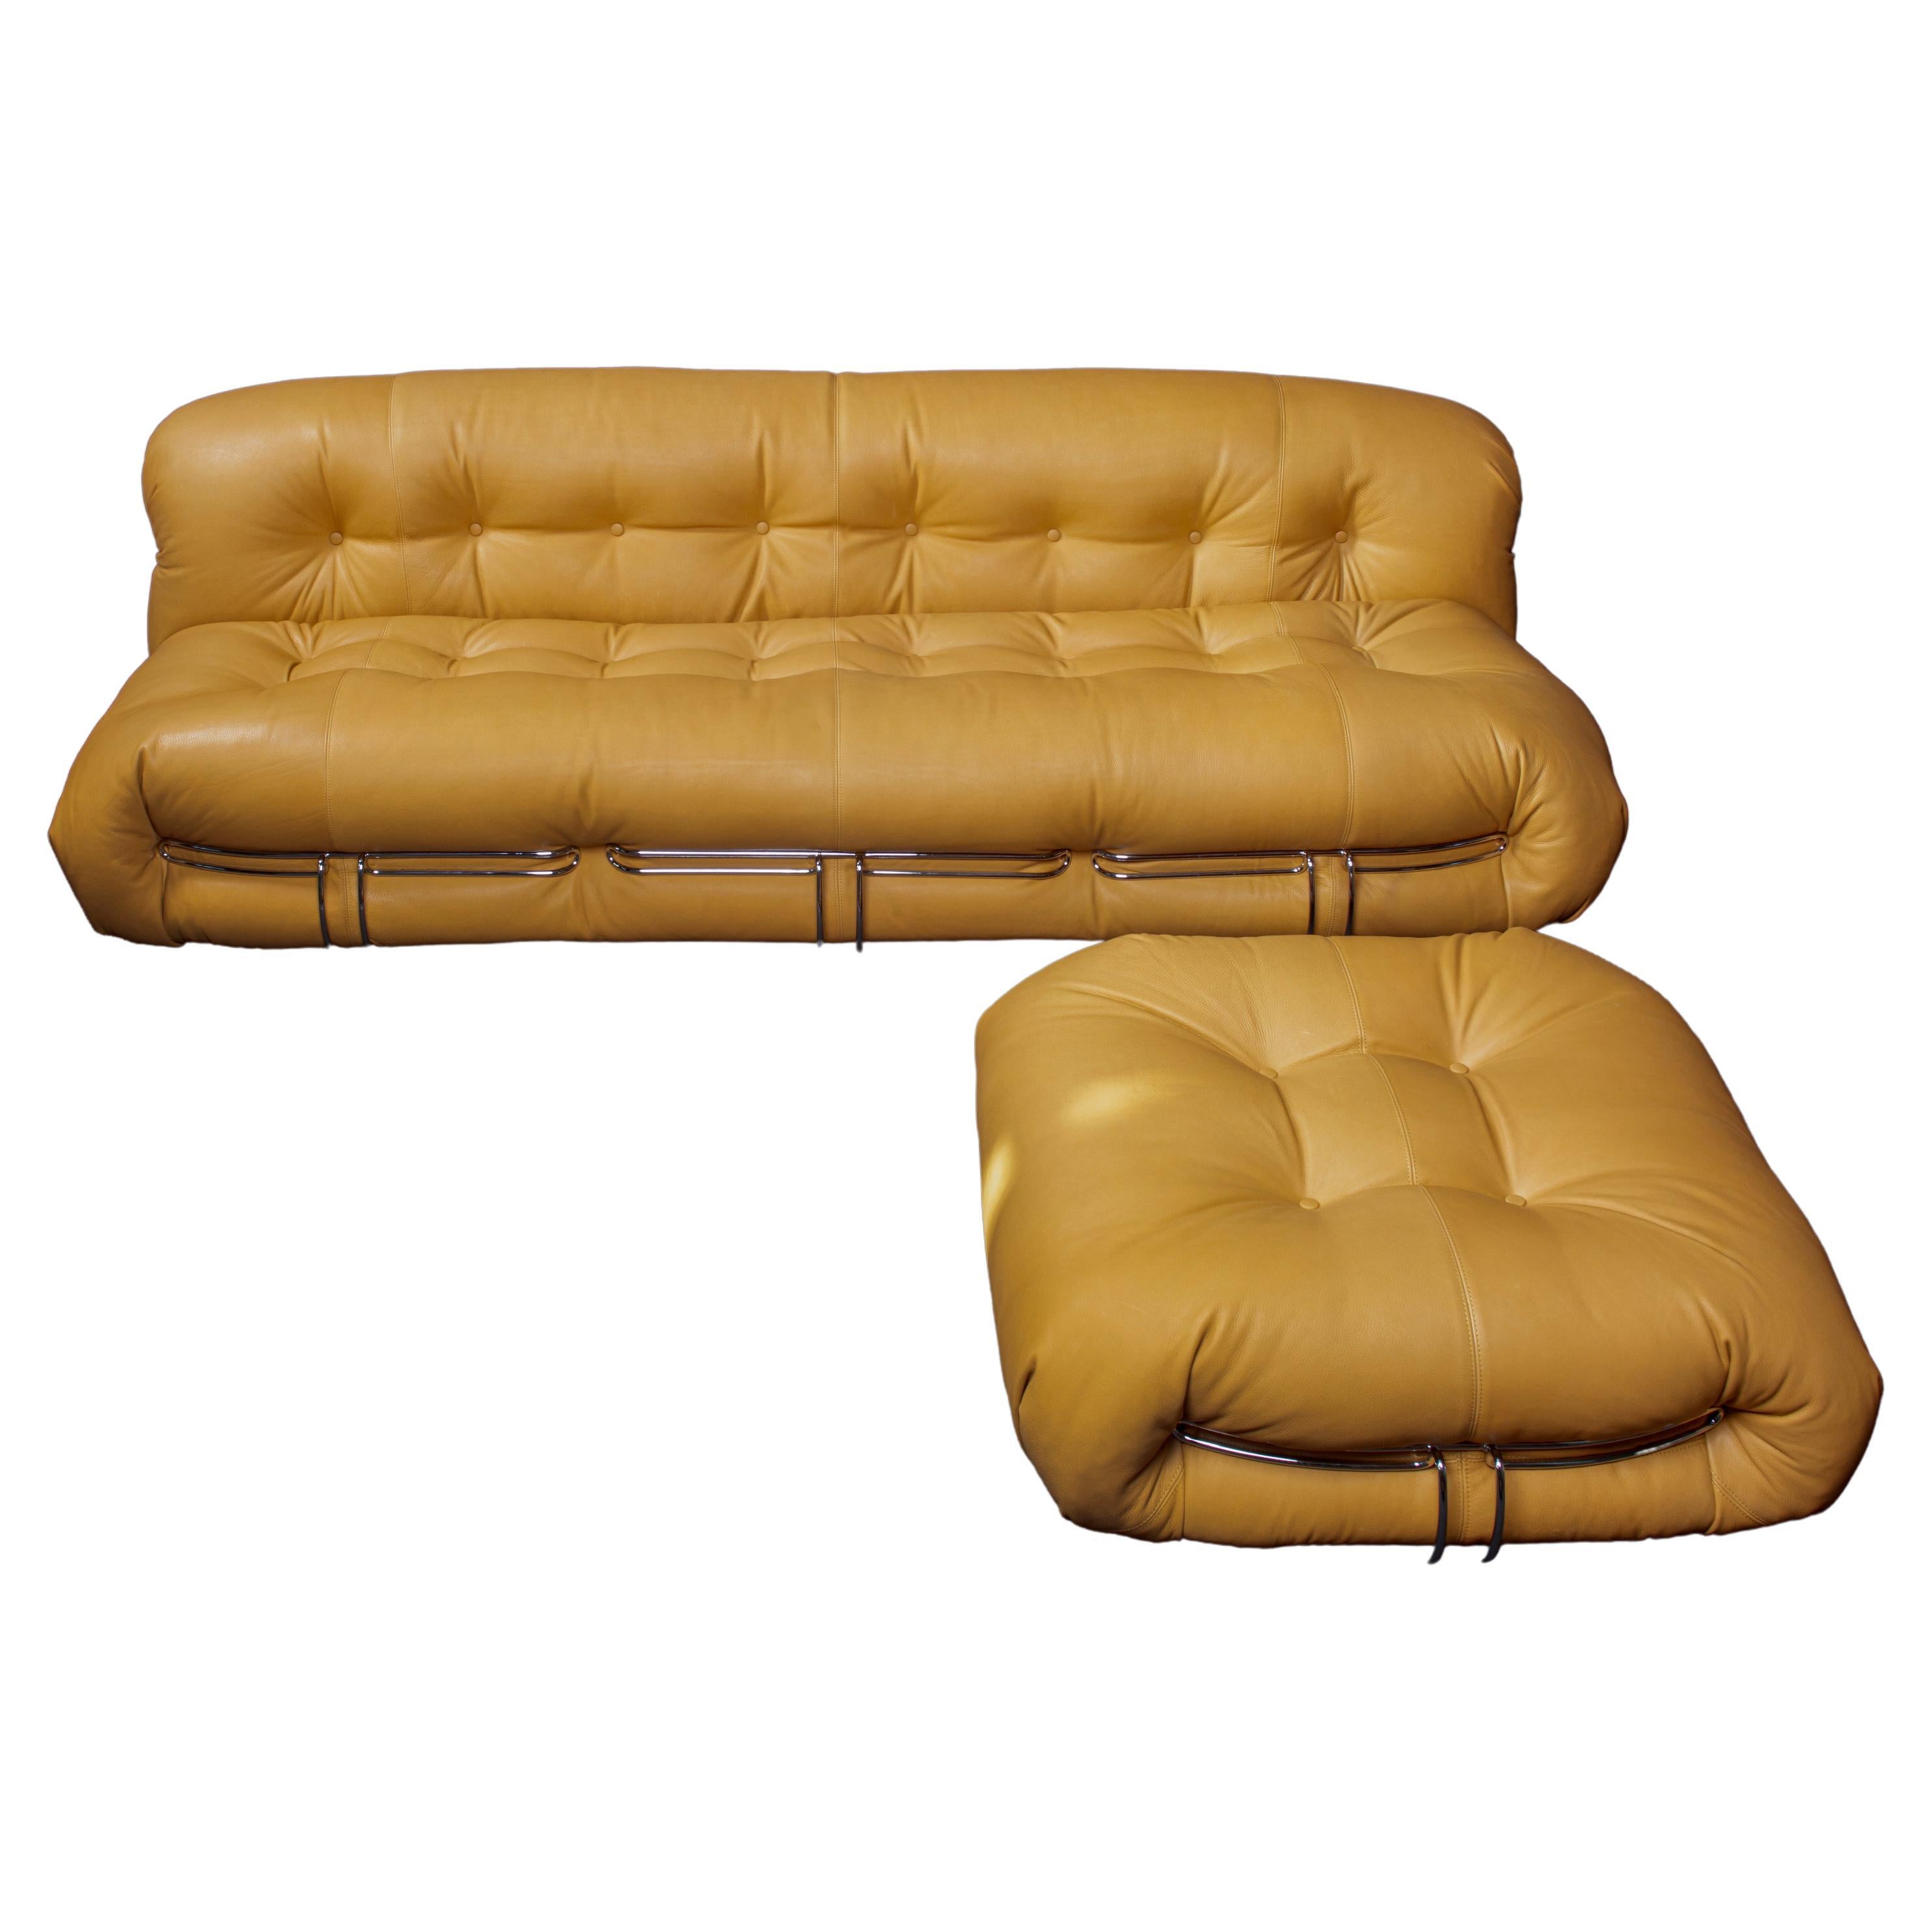 Prices vary dependent on the material/color/model of the product.
Afra & Tobia Scarpa Soriana sofa and ottoman in light tobacco leather by Cassina in aniline leather.
The ottoman is 95x82x42cm.